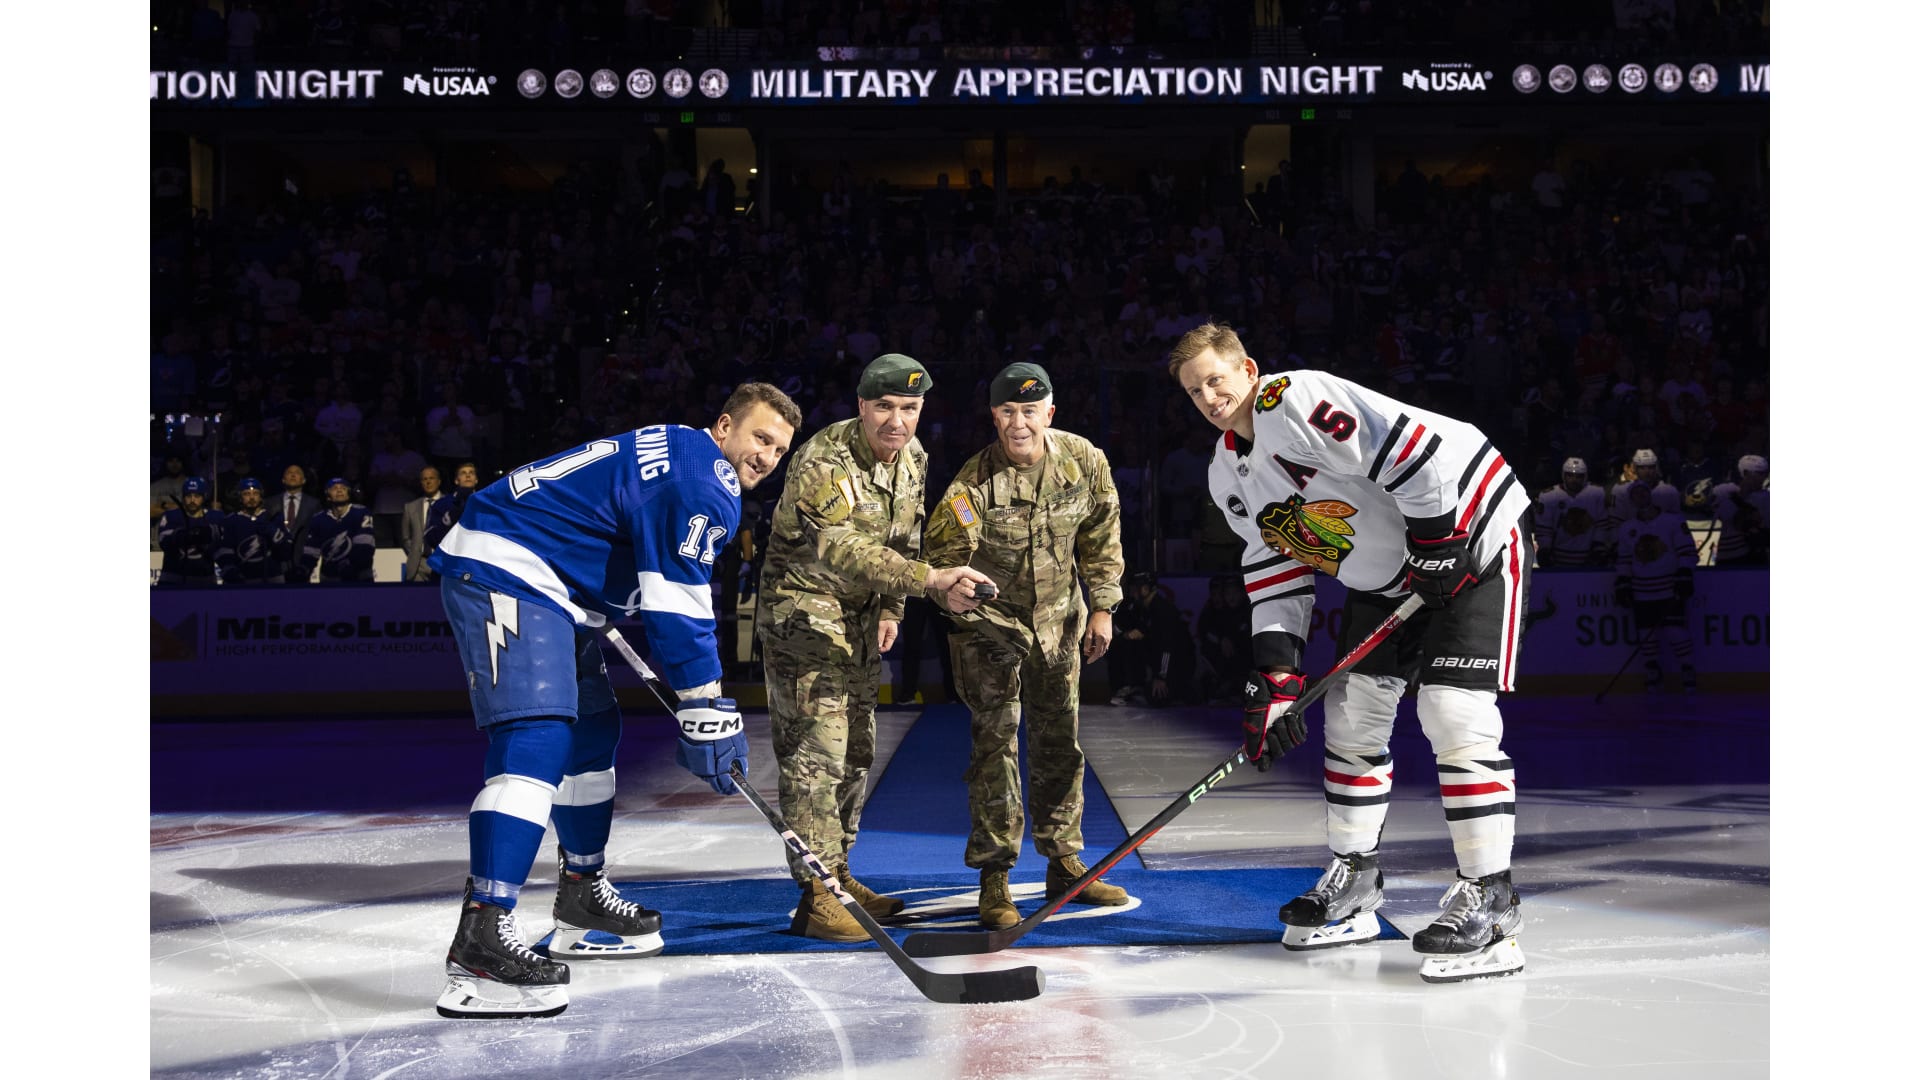 NHL All-Star game brings Stanley Cup to MacDill > MacDill Air Force Base >  News